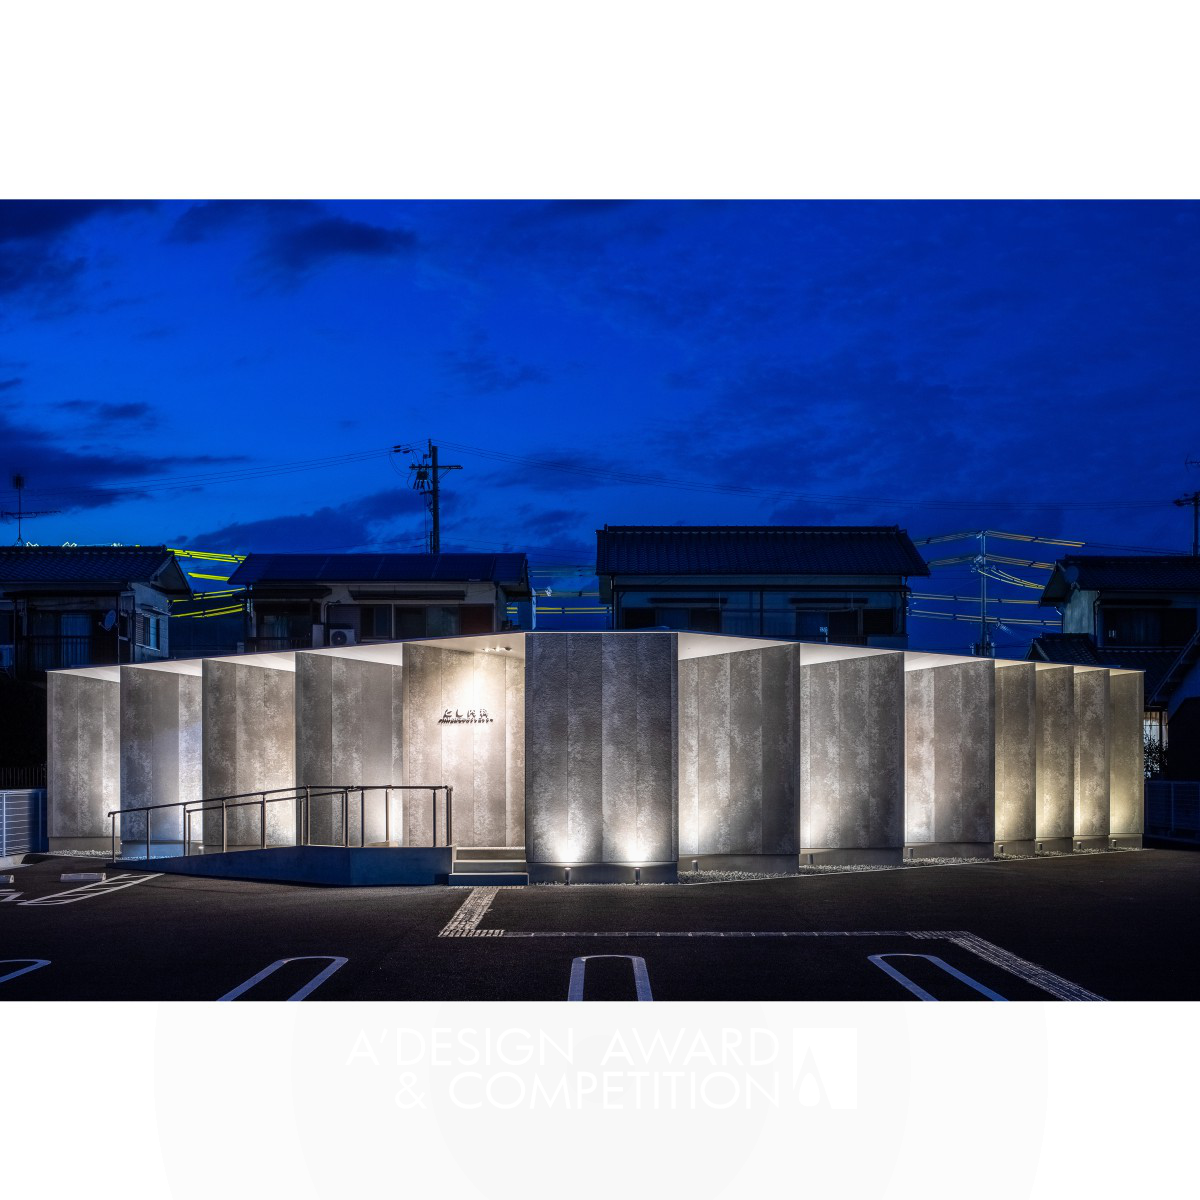 Tetsuya Matsumoto wins Silver at the prestigious A' Architecture, Building and Structure Design Award with The OmniDirectional Internal Medicine Clinic.